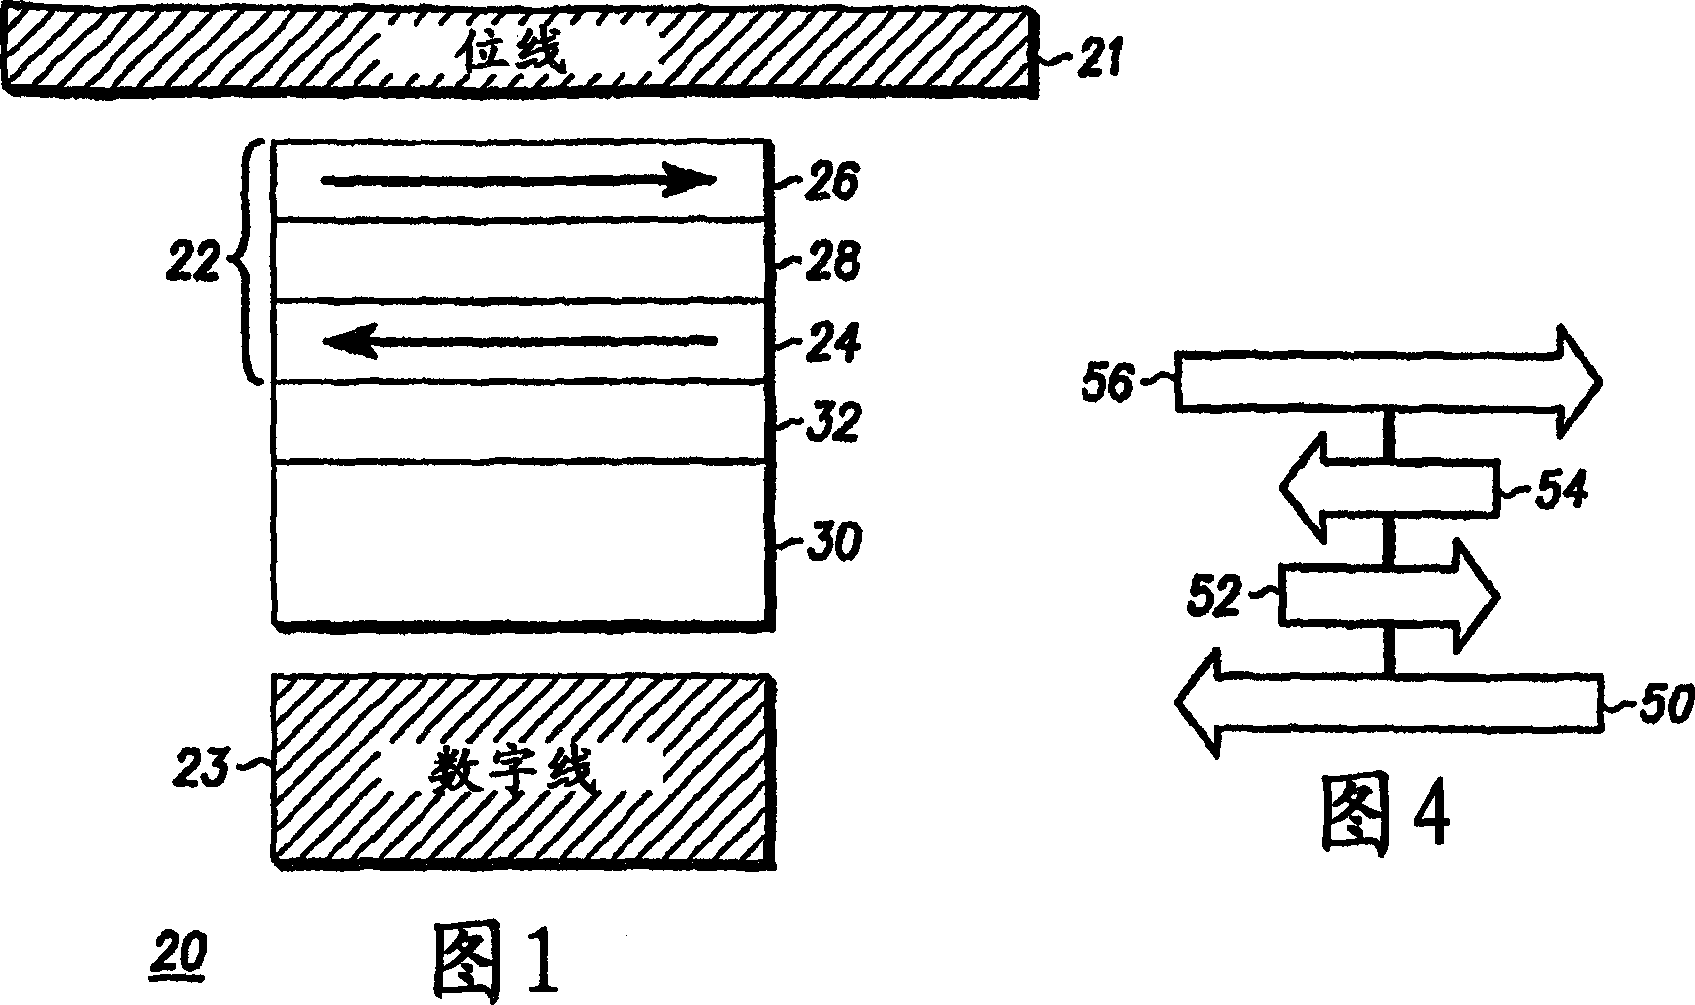 Magnetoelectronics information device having a compound magnetic free layer